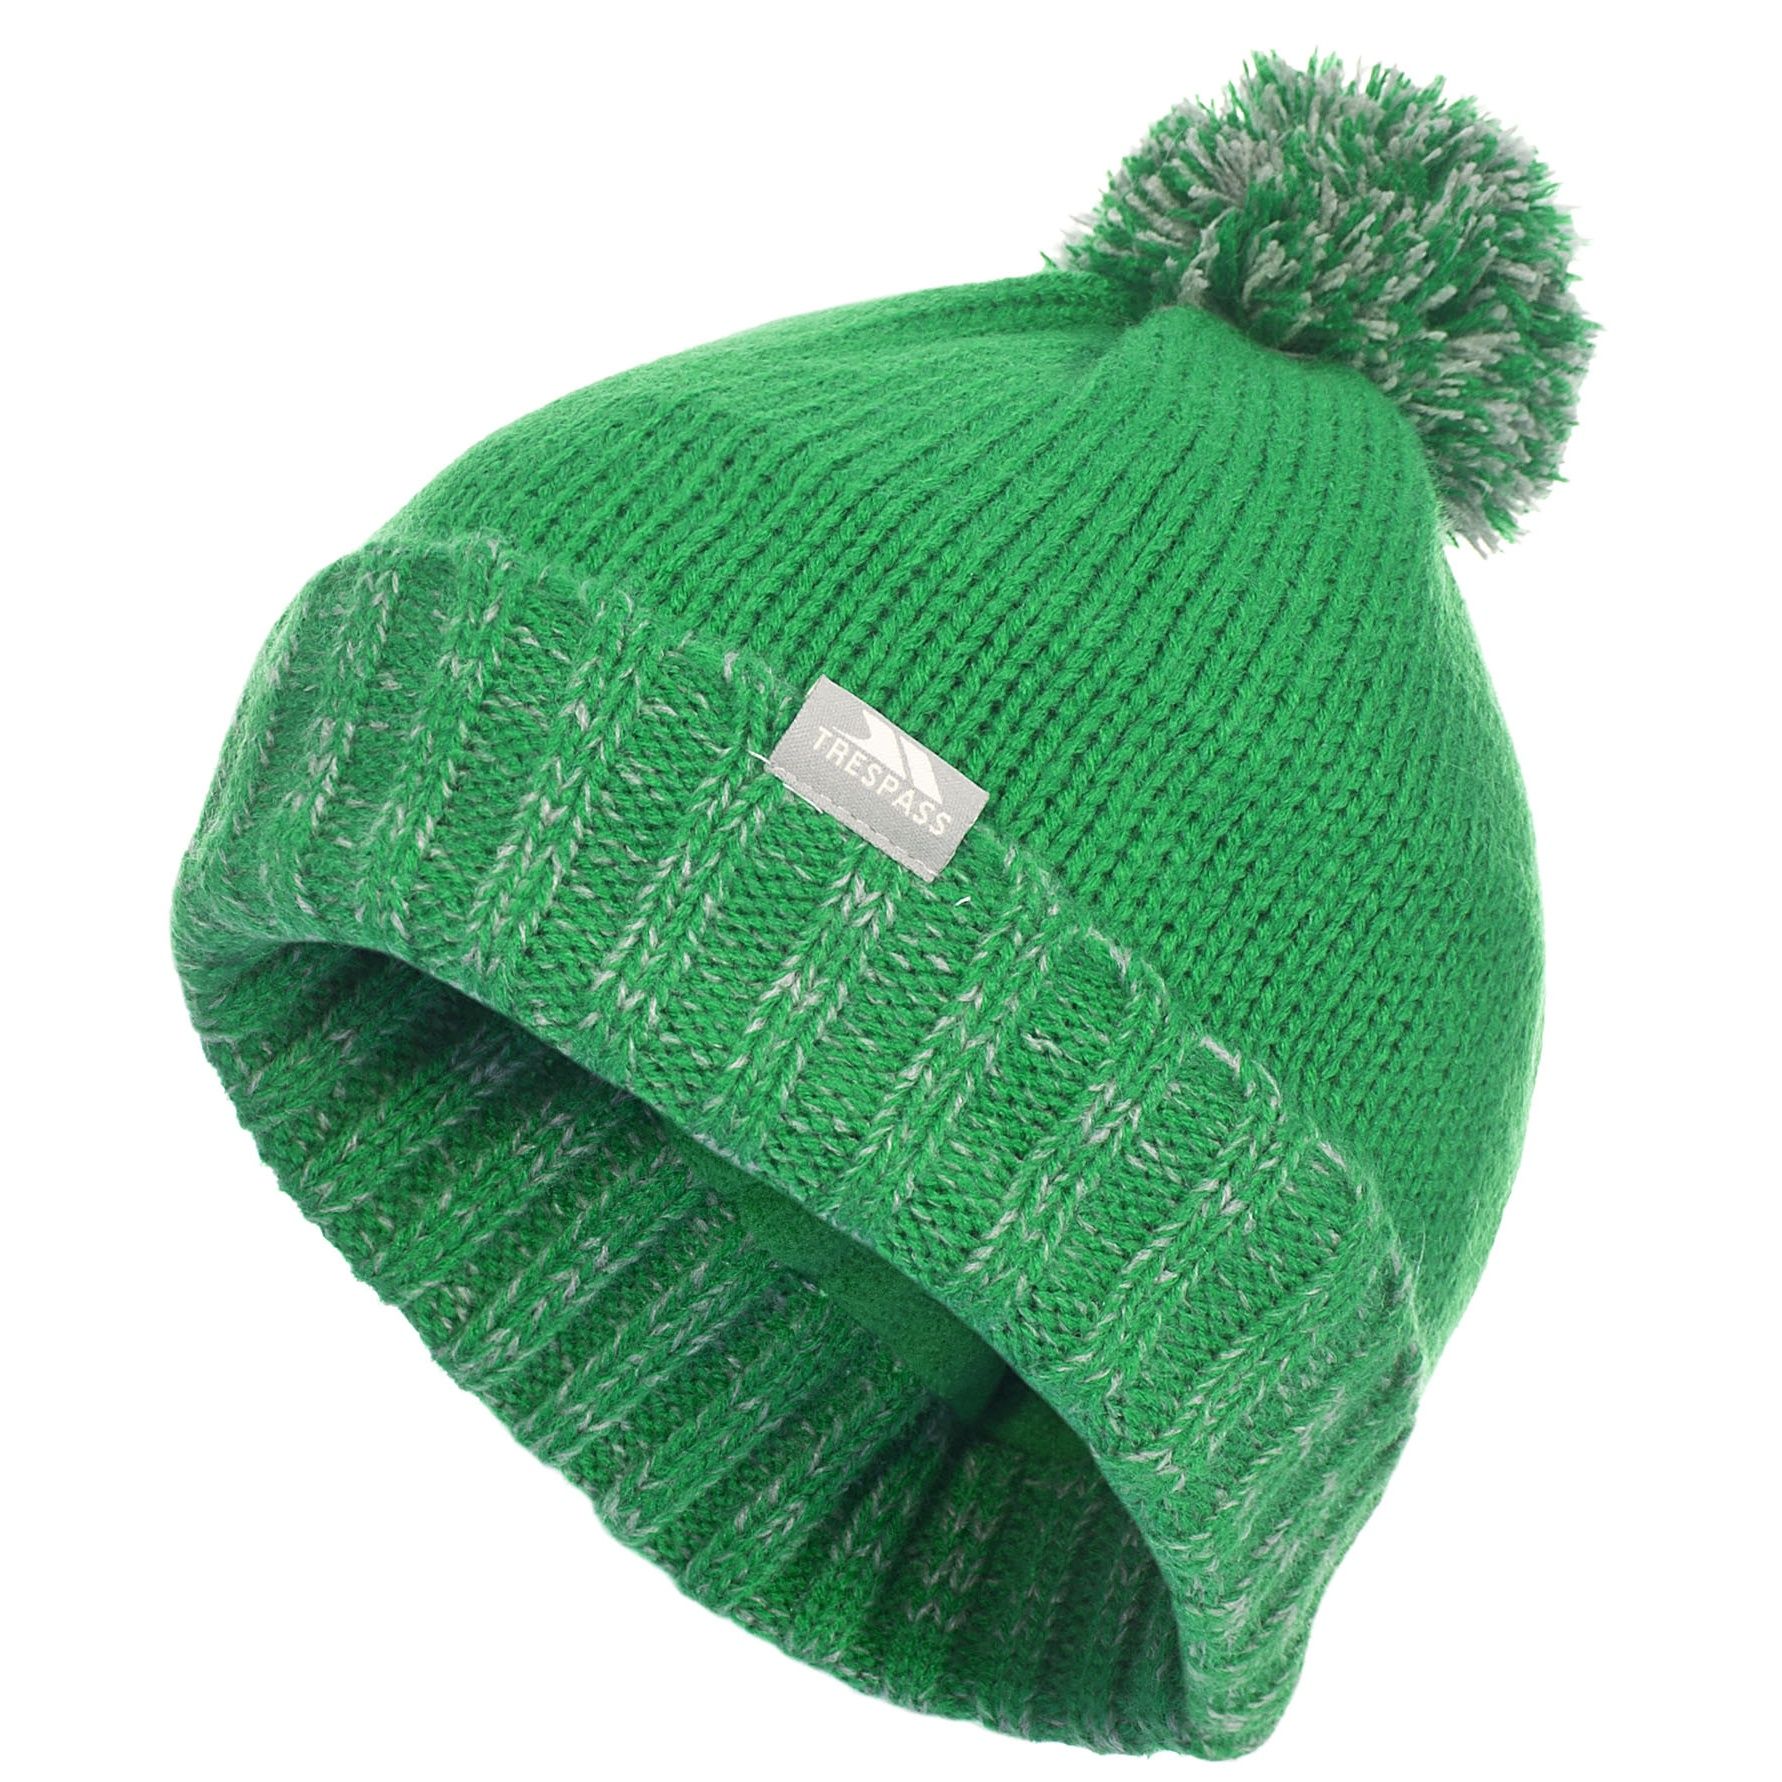 Knitted beanie hat with pom pom. Fully fleece lined. Leatherette badge. Outer matieral: 100% acrylic, Lining: 100% polyester anti pil fleece.